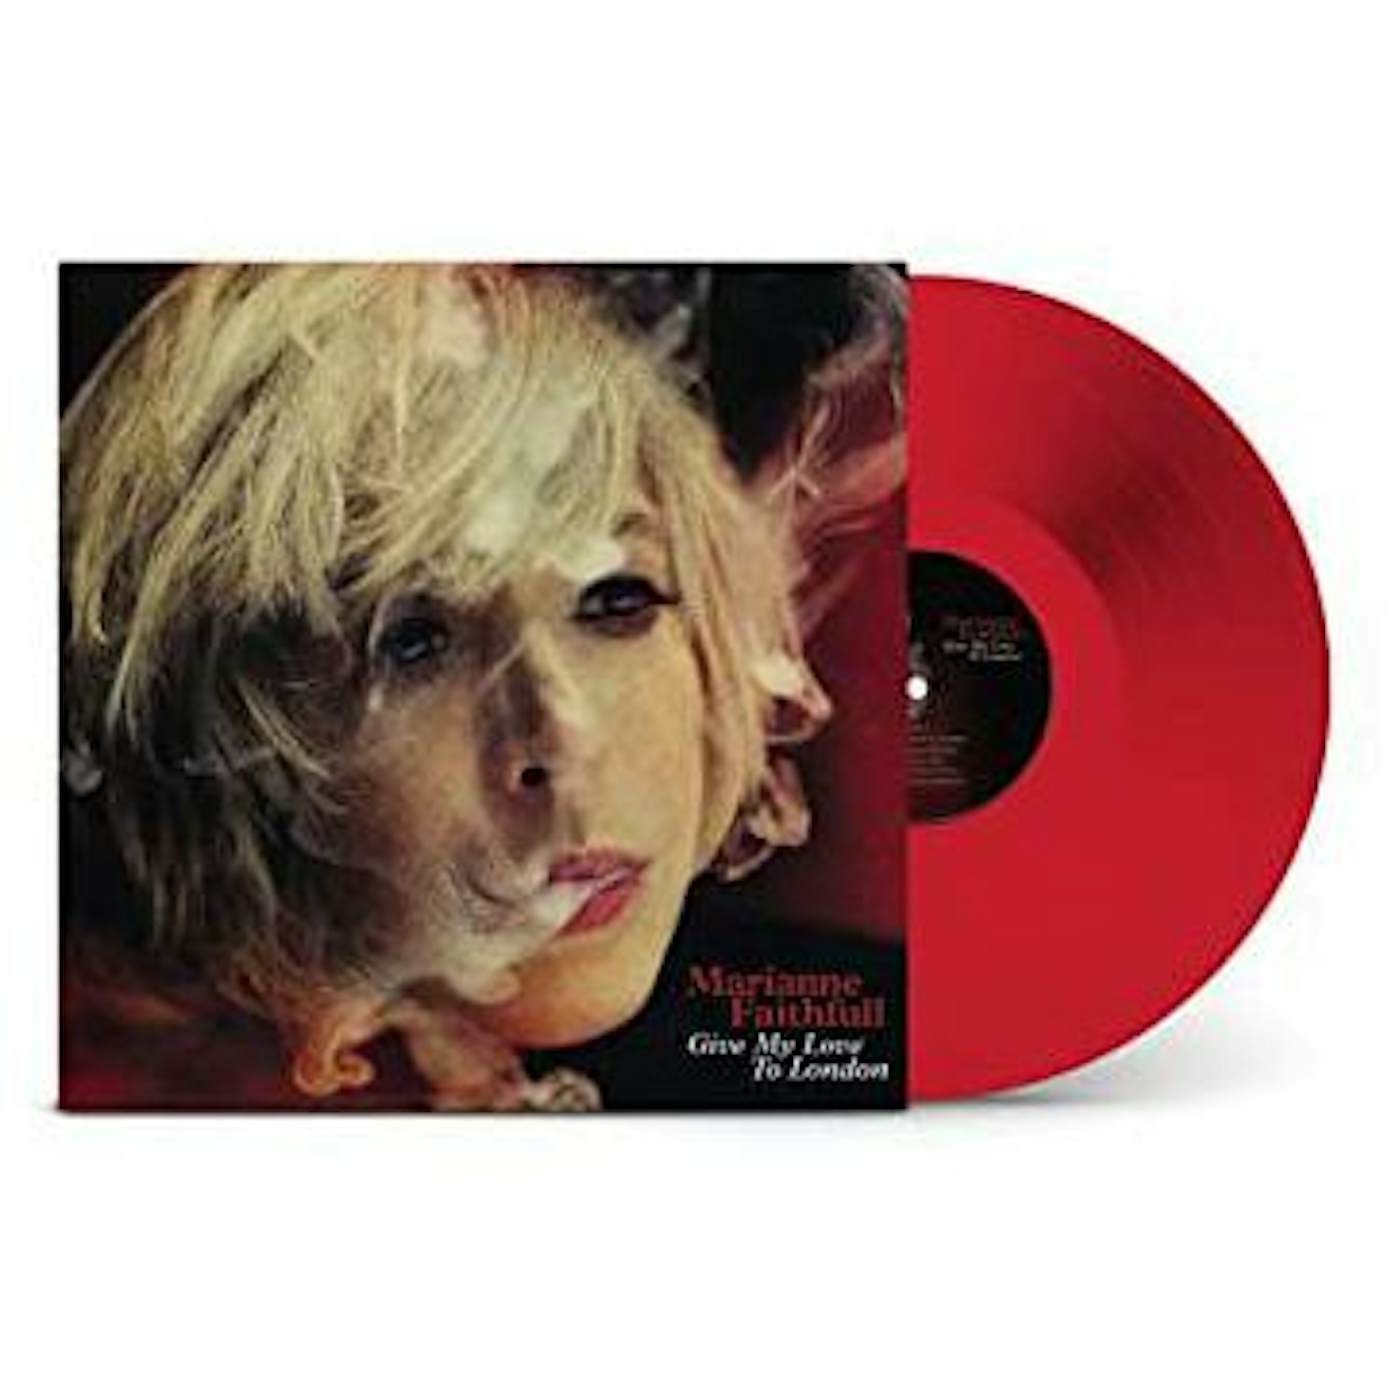 Marianne Faithfull Give My Love To London - Red Vinyl Record